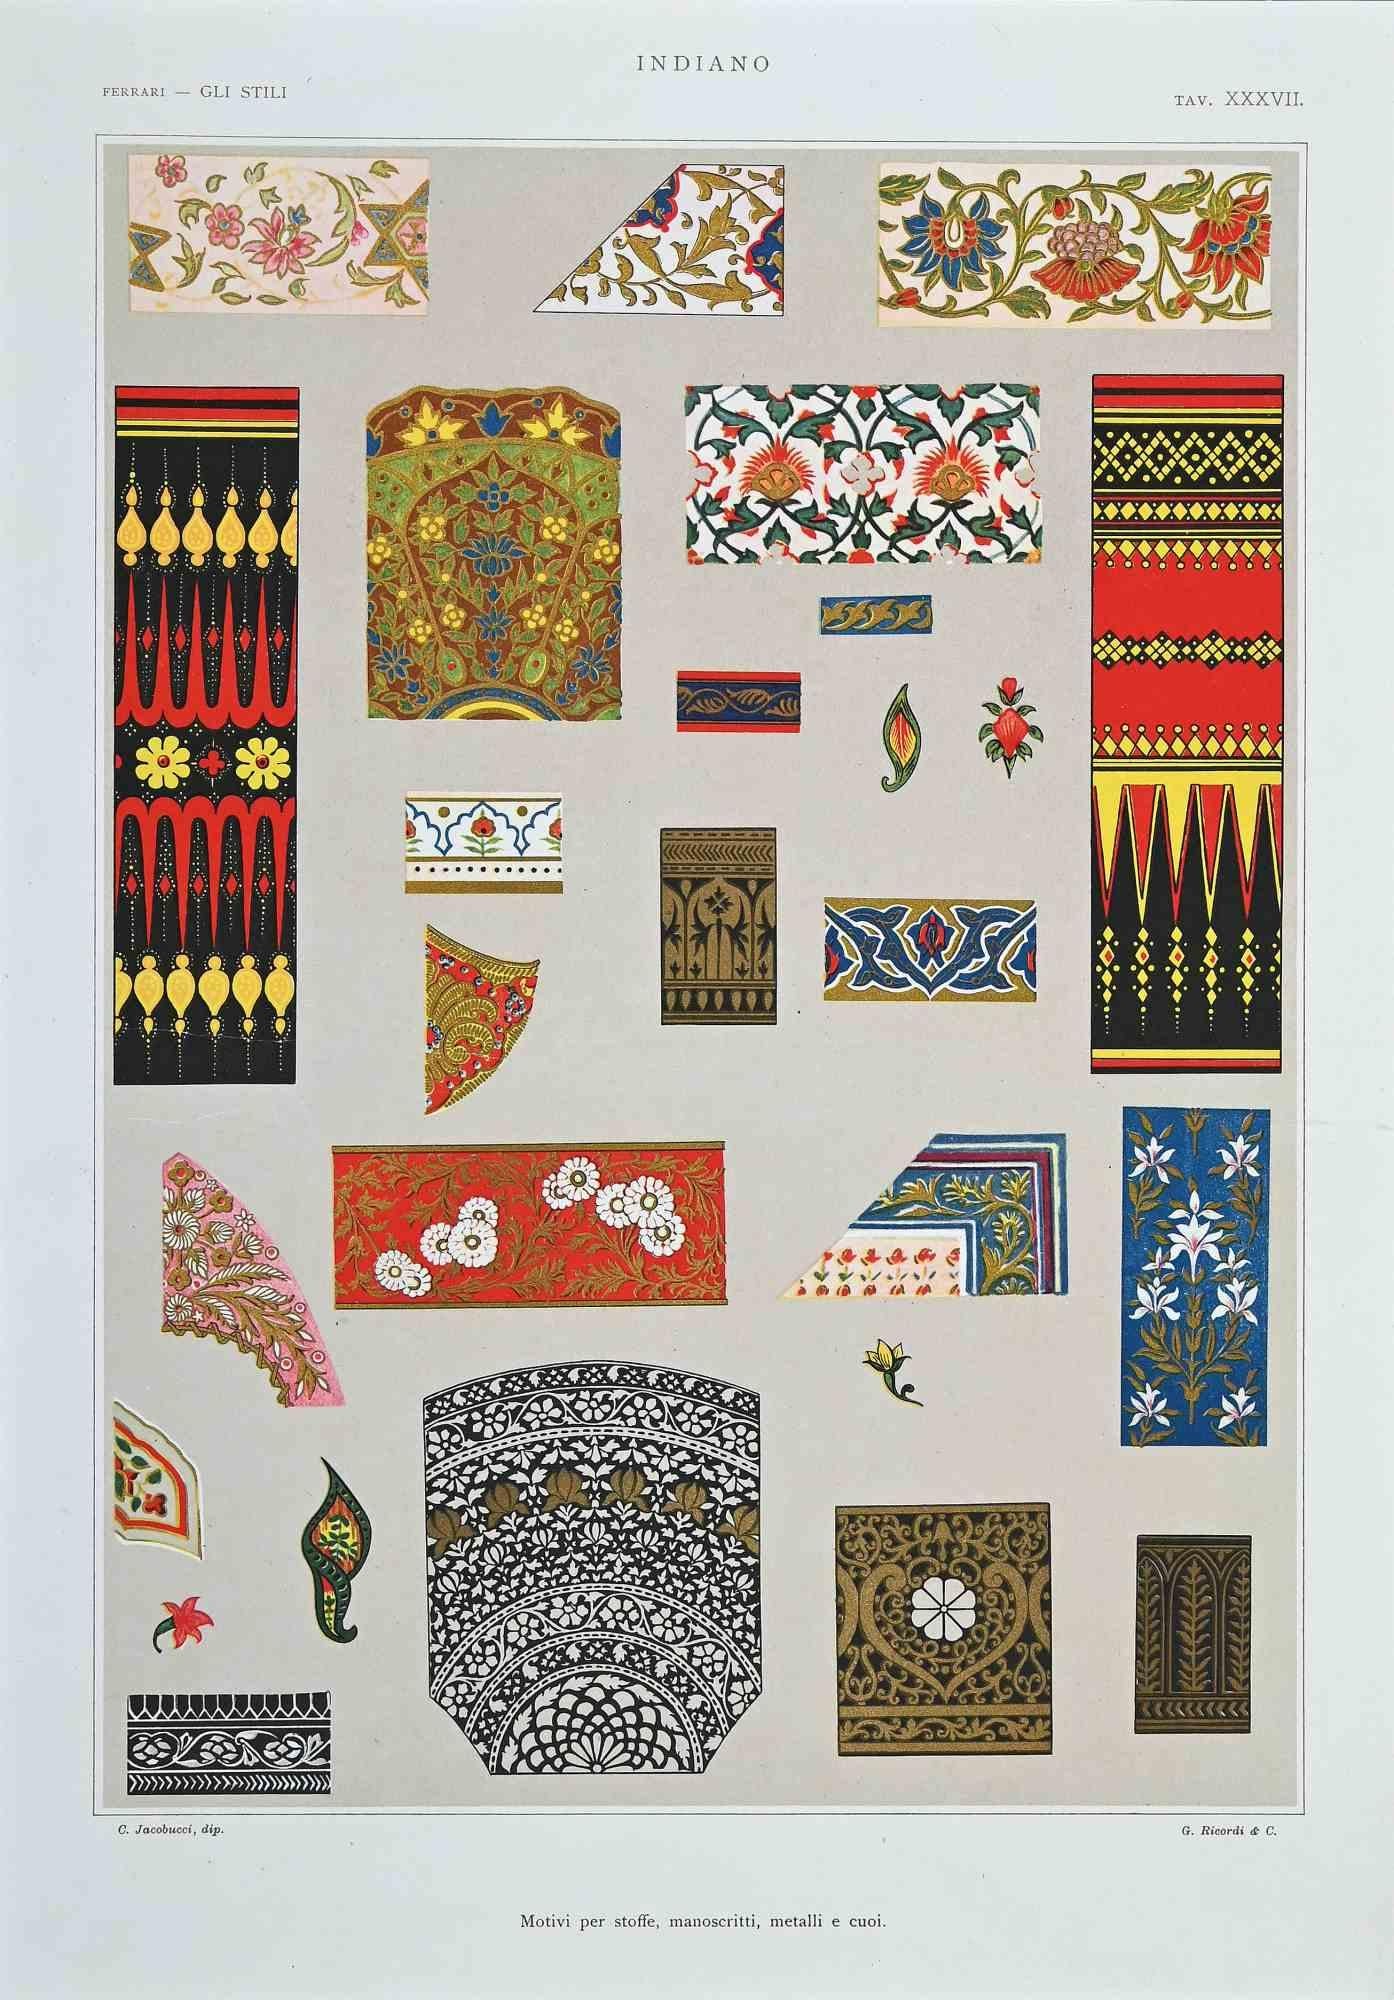 Designs for Fabric - Original Lithograph - Early 20th Century